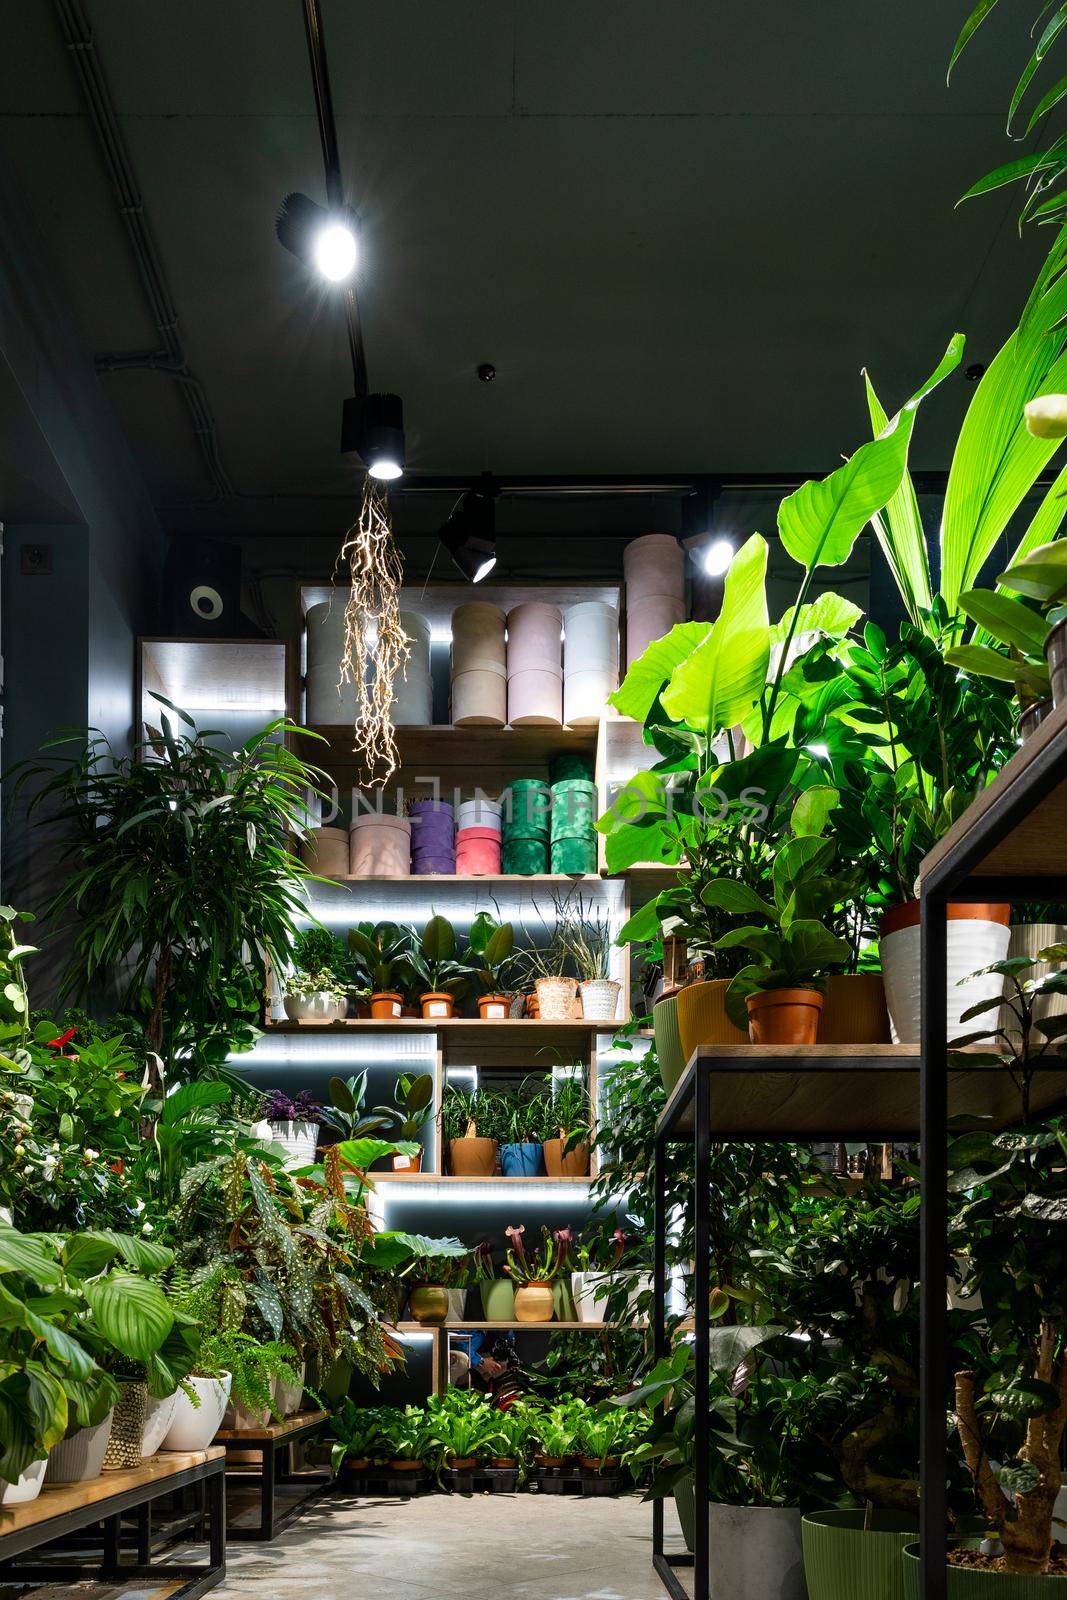 interior of a floristic shop selling potted plants and bouquets in loft style.